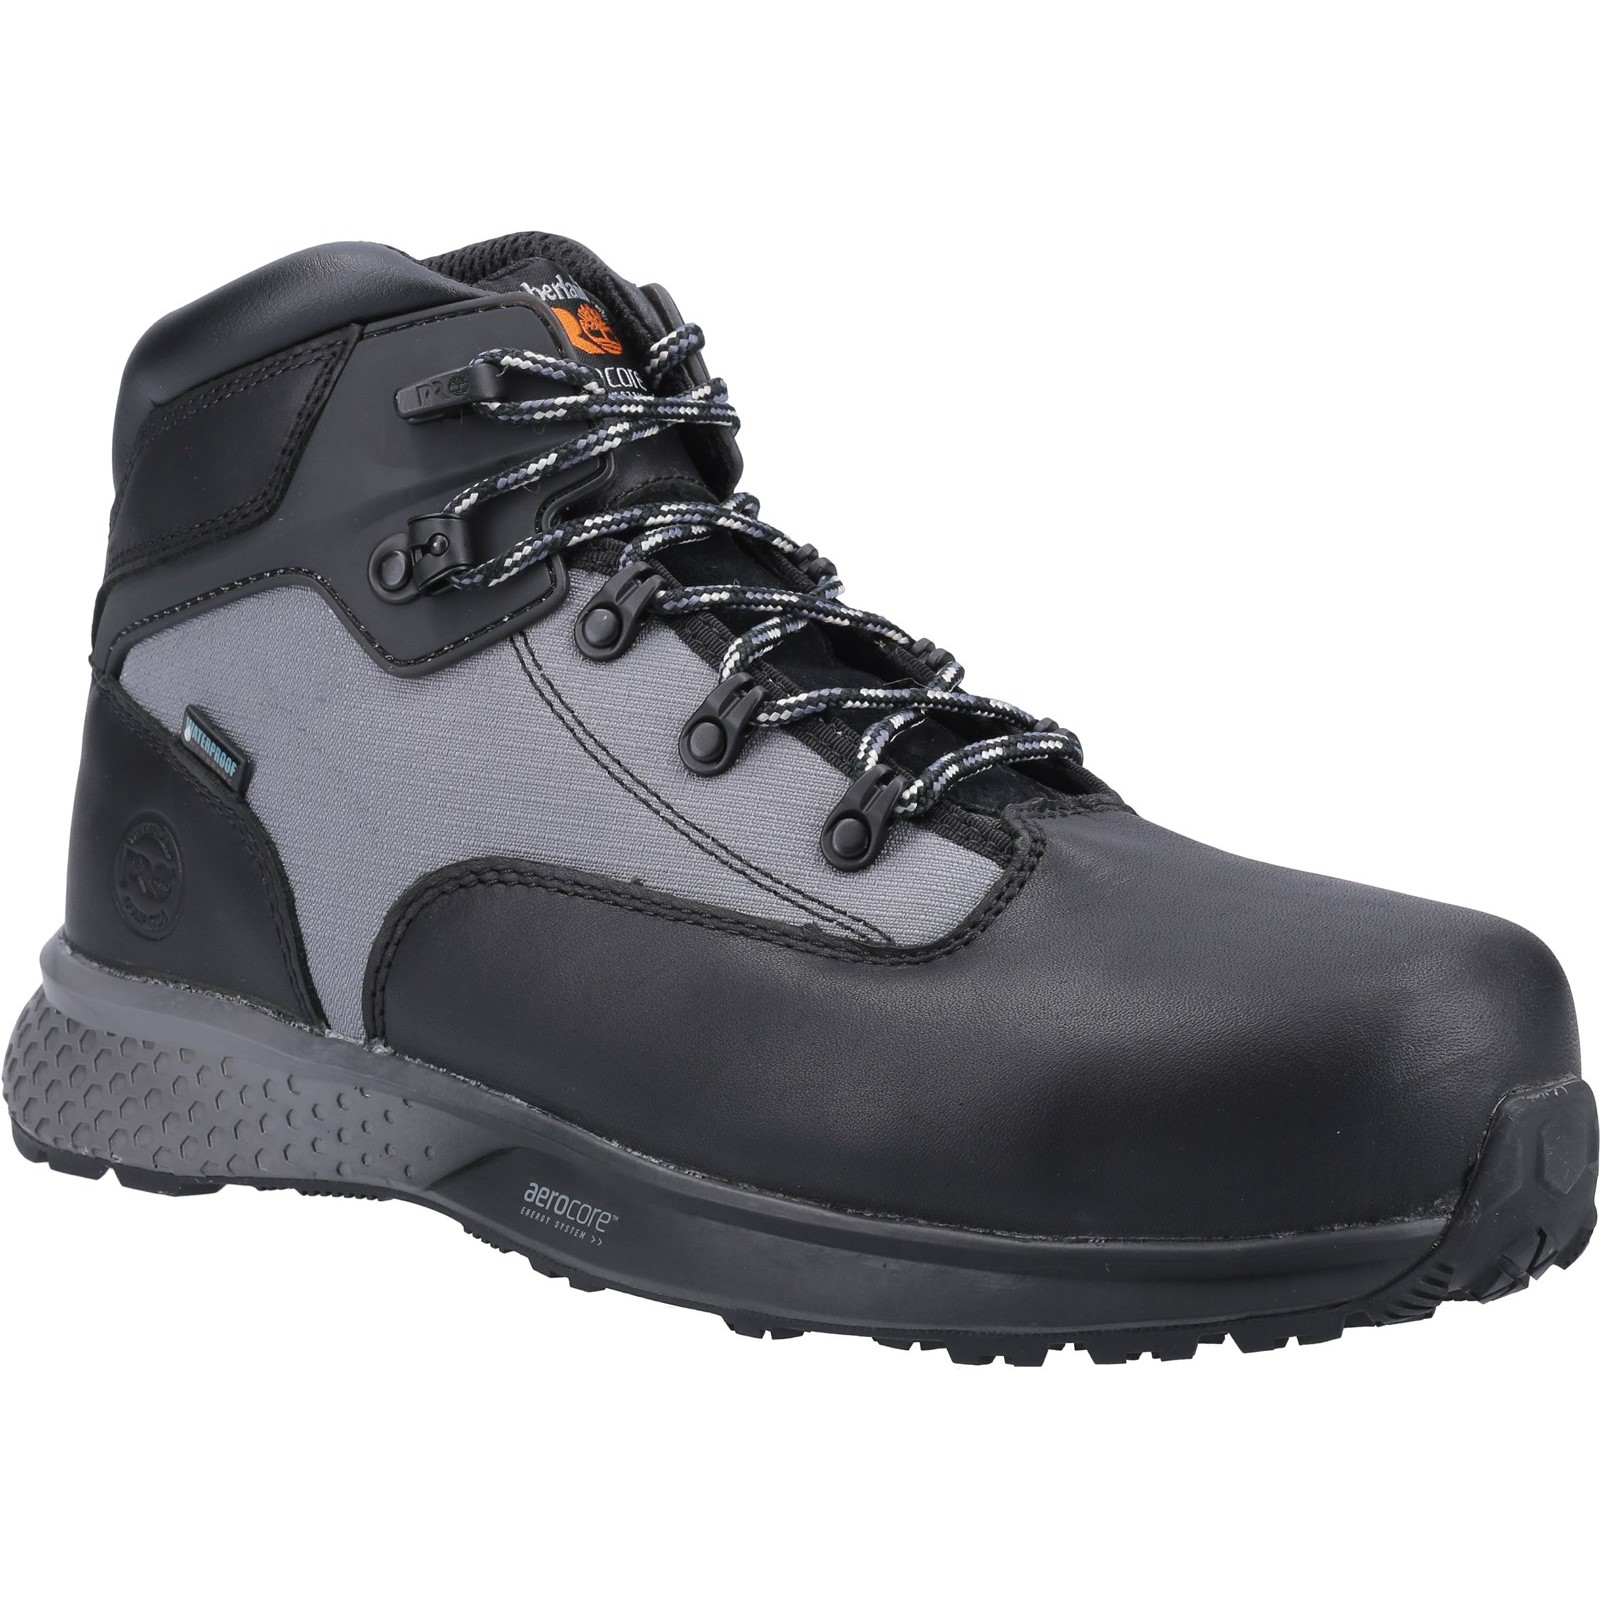 Euro Hiker Composite Safety Boot